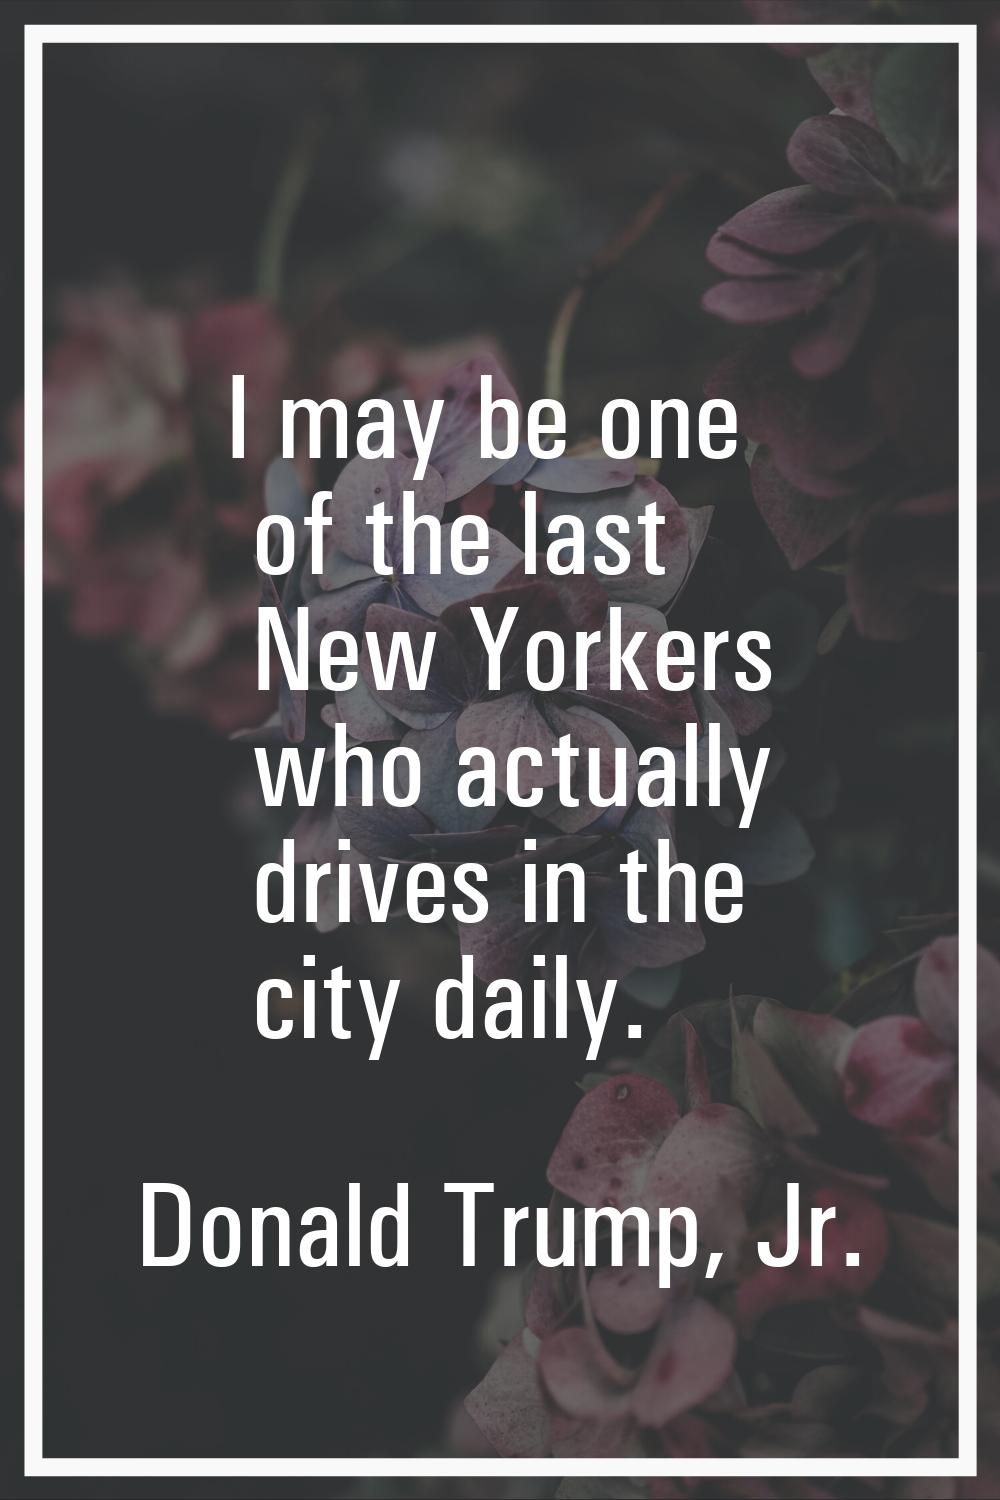 I may be one of the last New Yorkers who actually drives in the city daily.